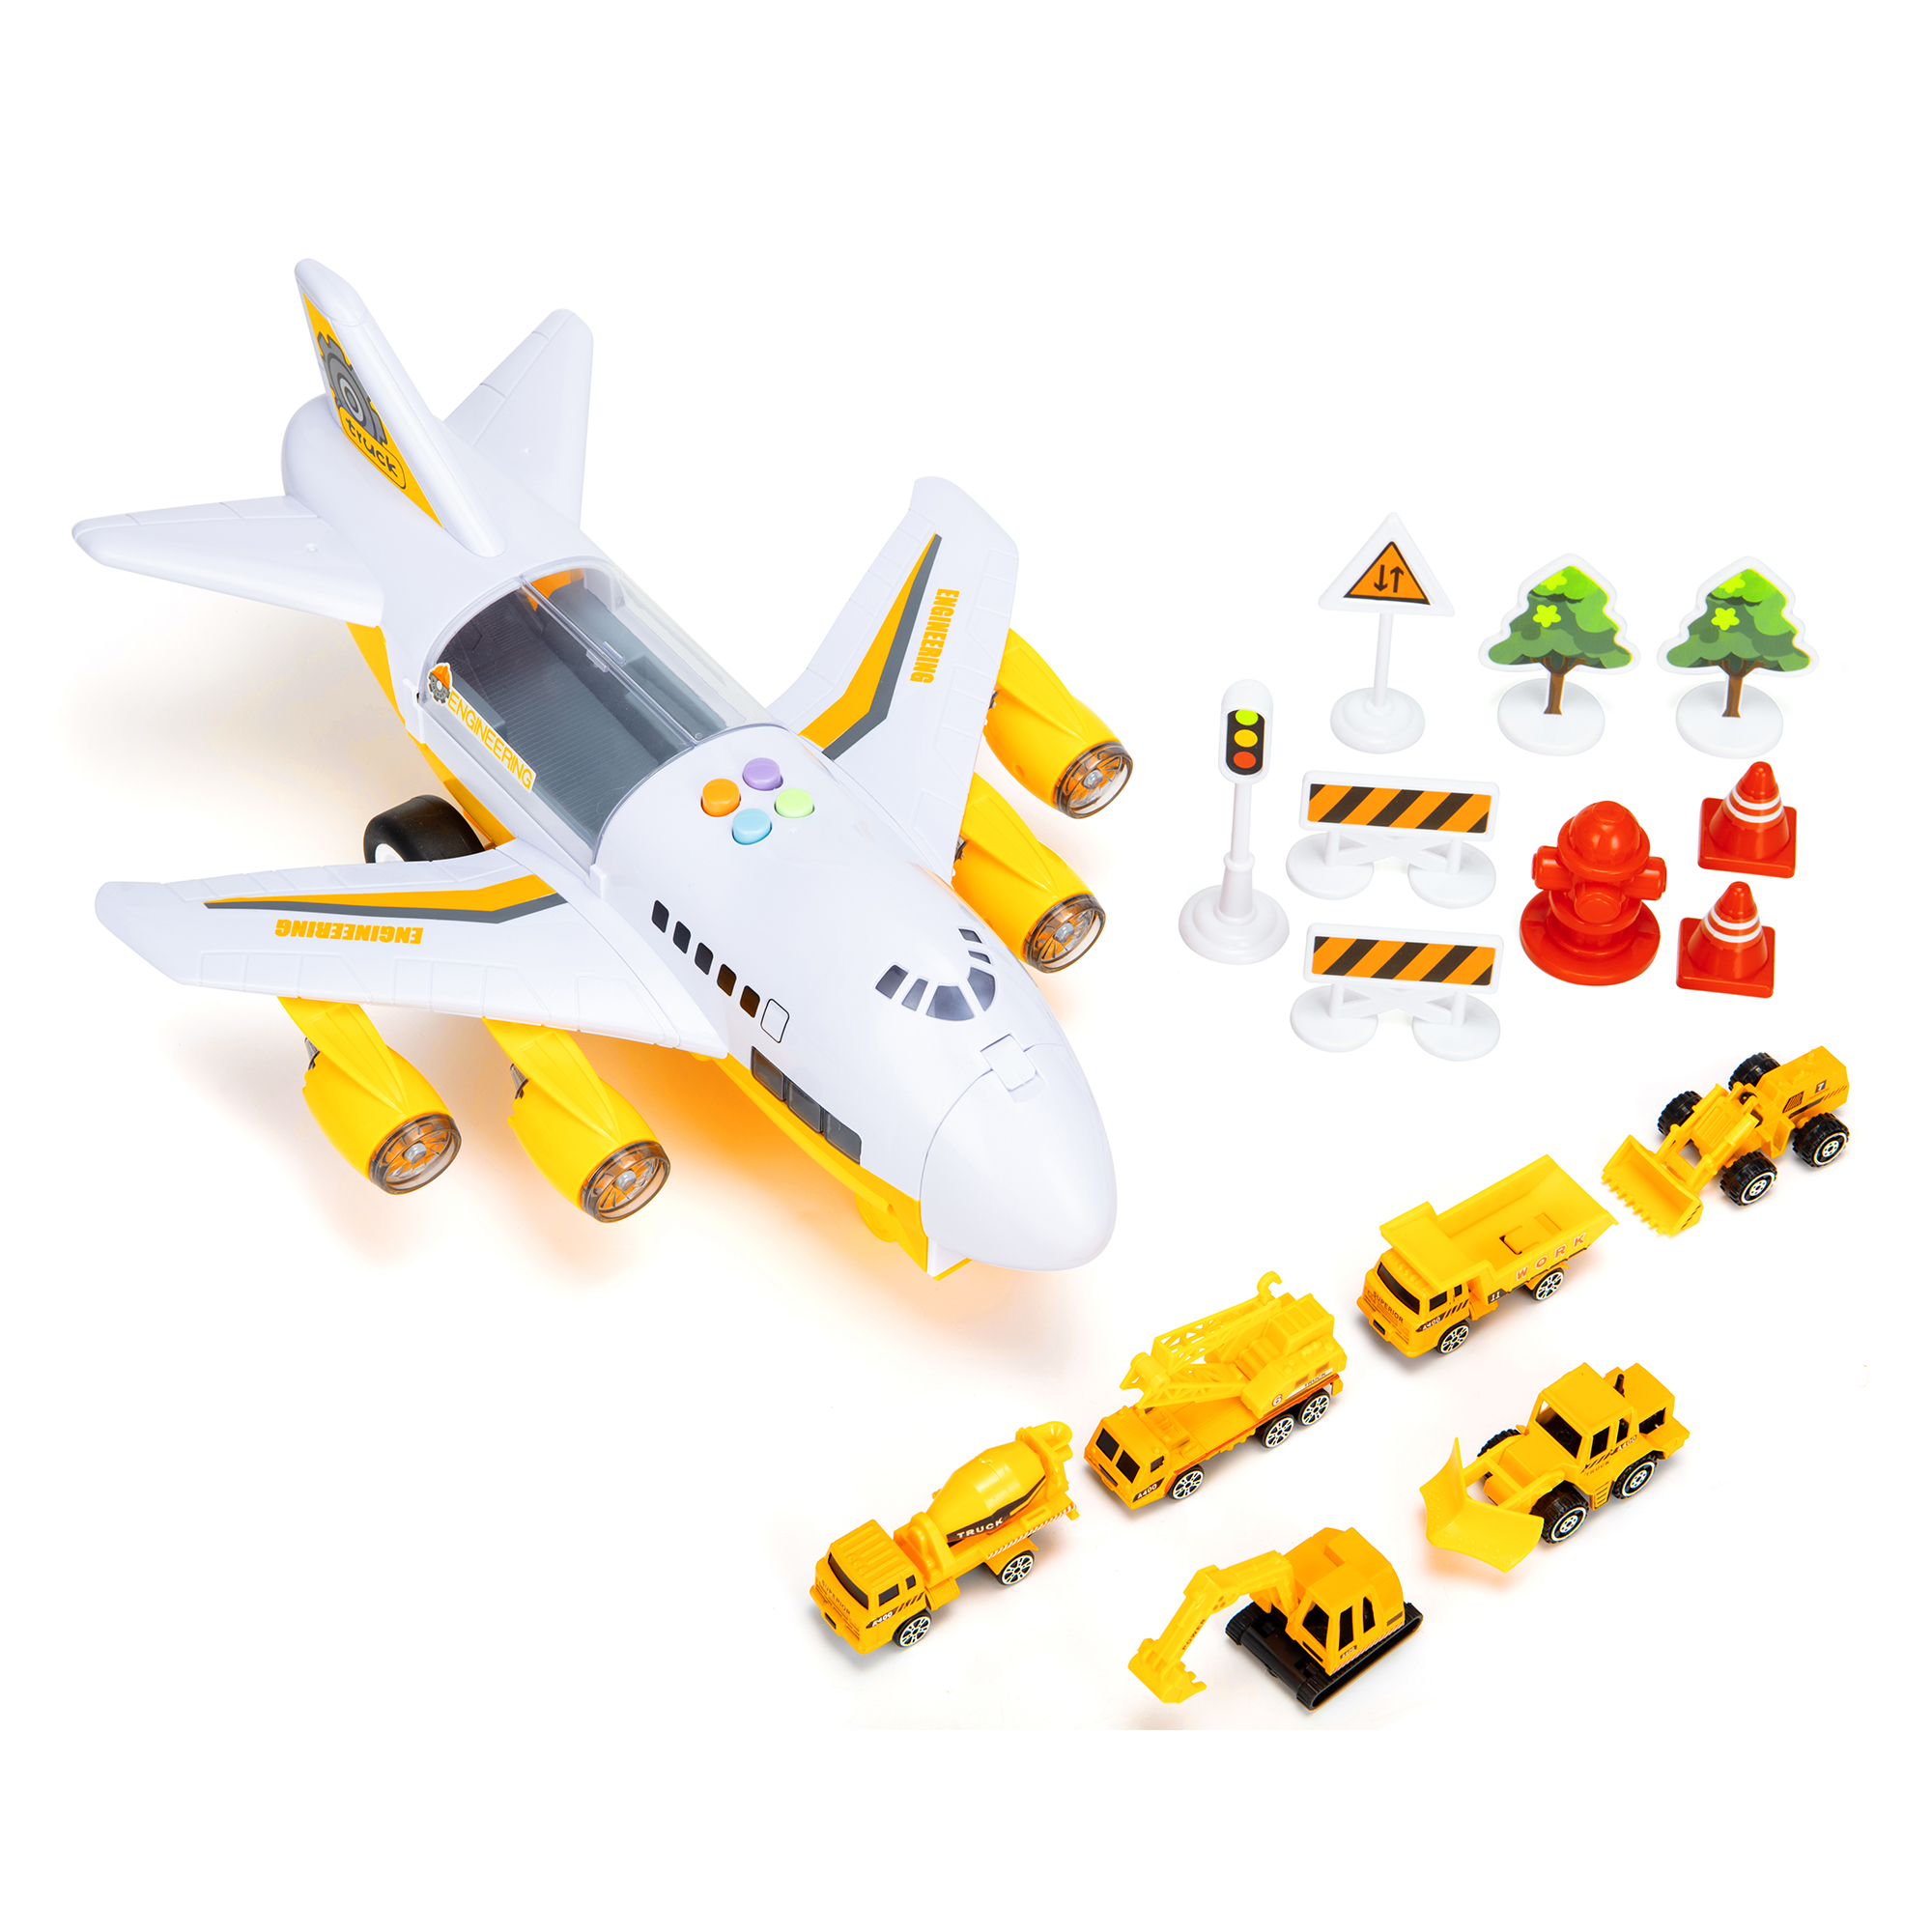 Airplane Toy with Car Toy Helicopter Set Toddler Cargo Transport Airplane Gift Age 3 4 5 6 8 Years Old 6 Mini Vehicles 1 Large Plane 1 Large Play Mat 11 Road Signs - image 1 of 8